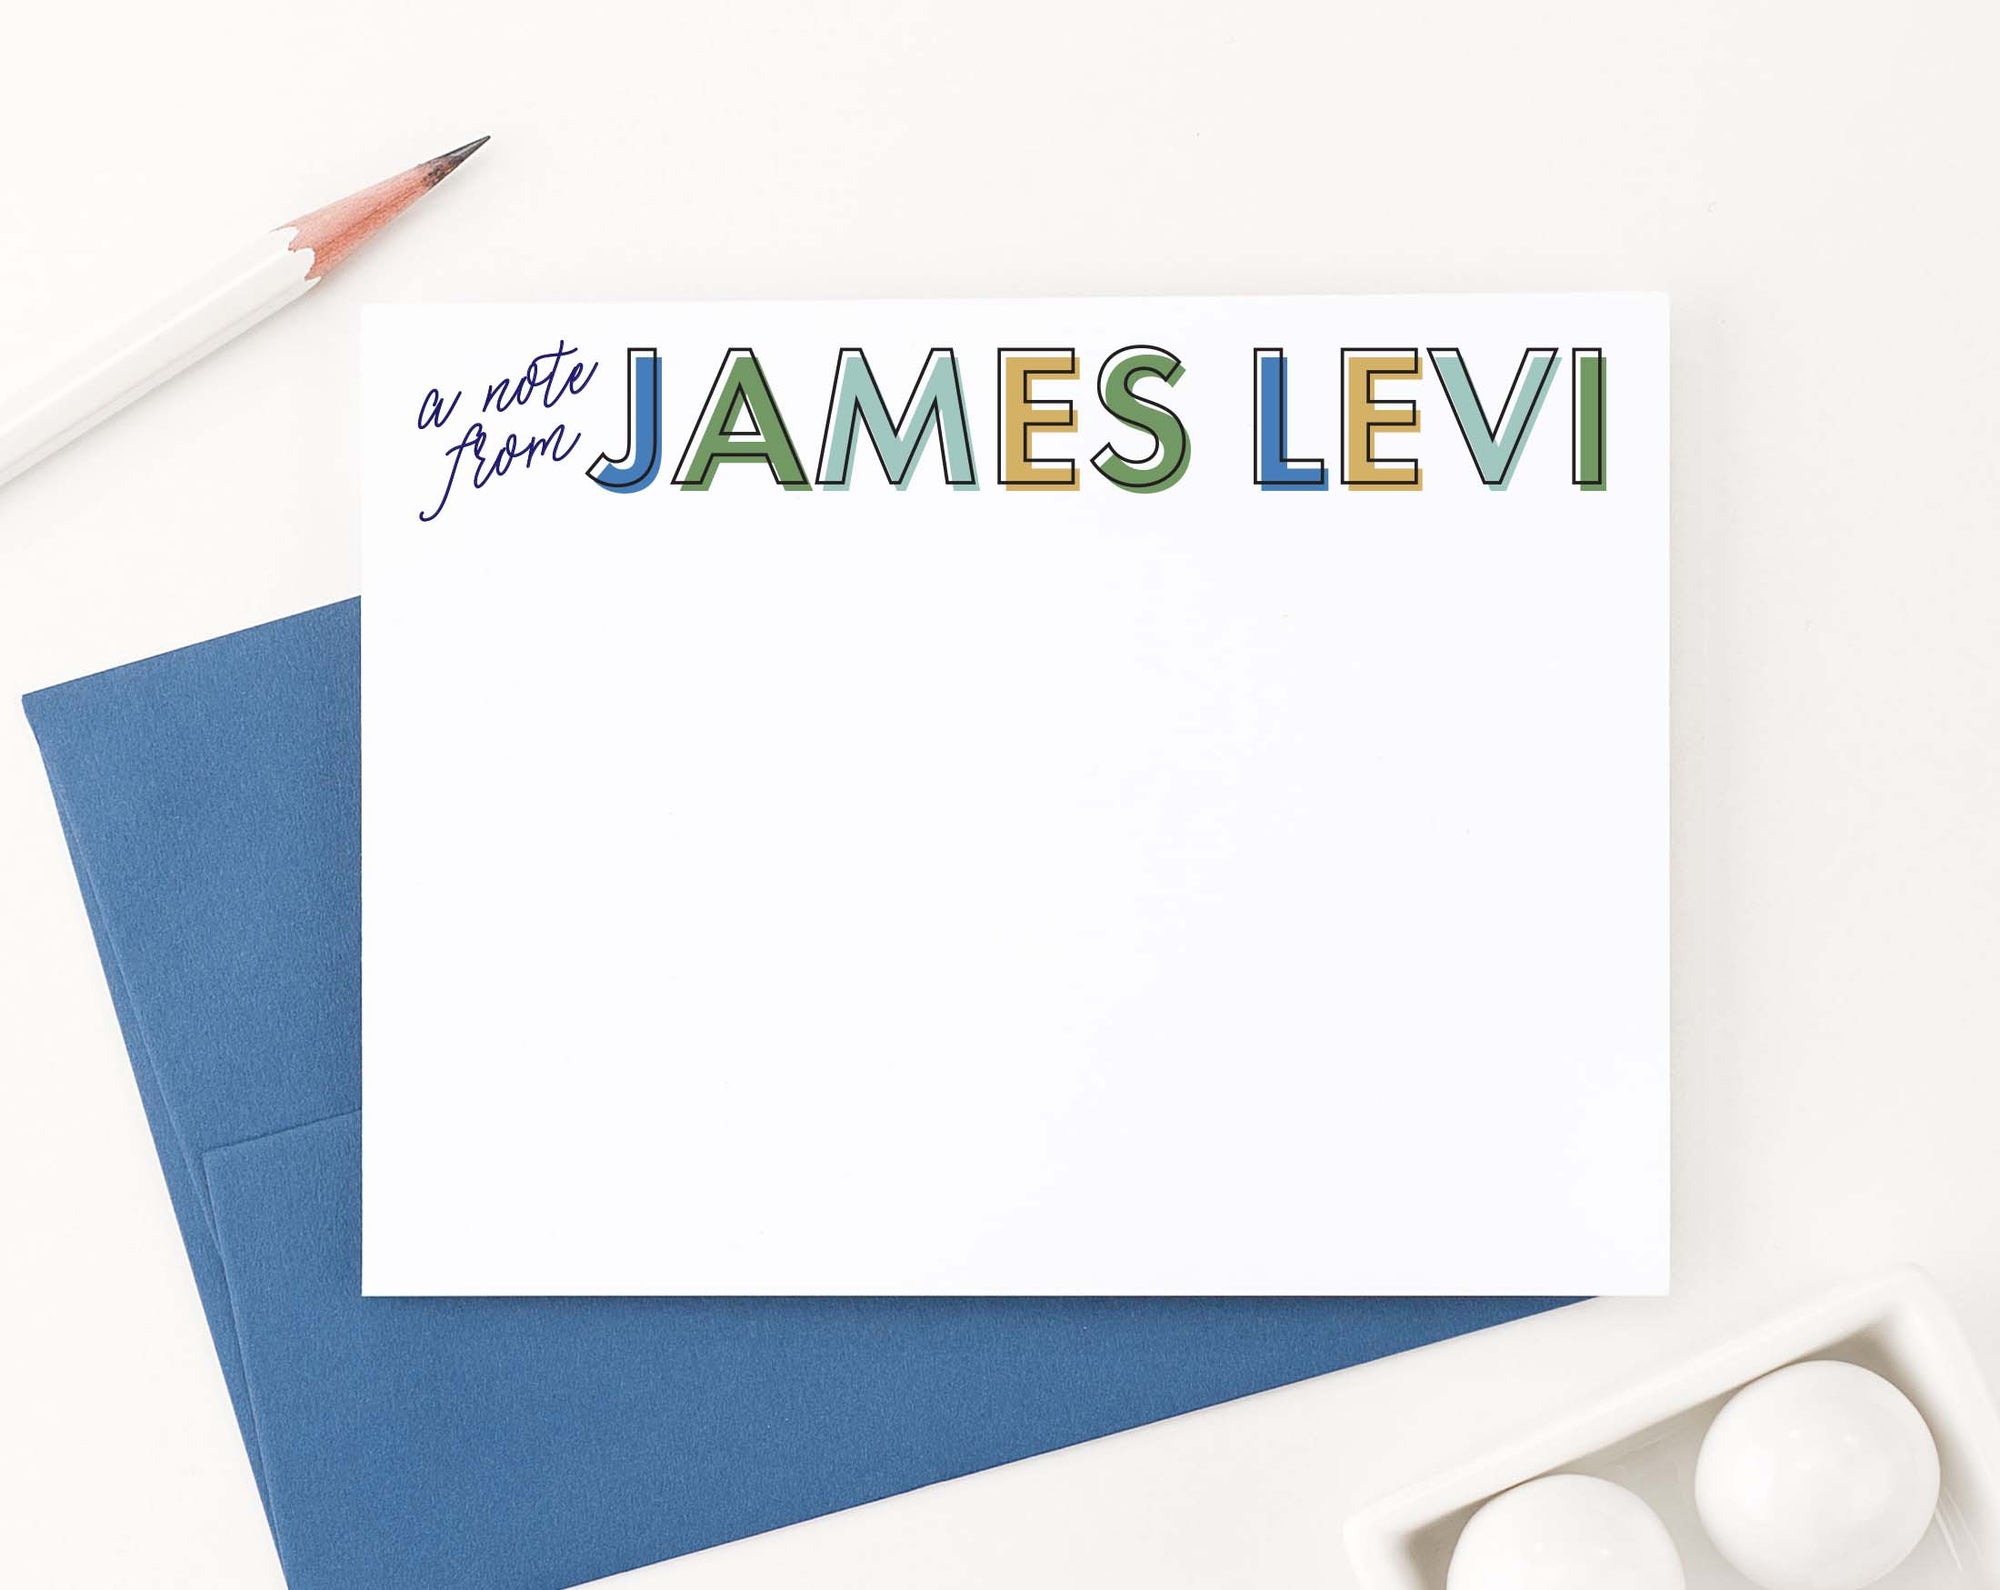 KS191 boys a note from personalized thank you cards green blue orange block font